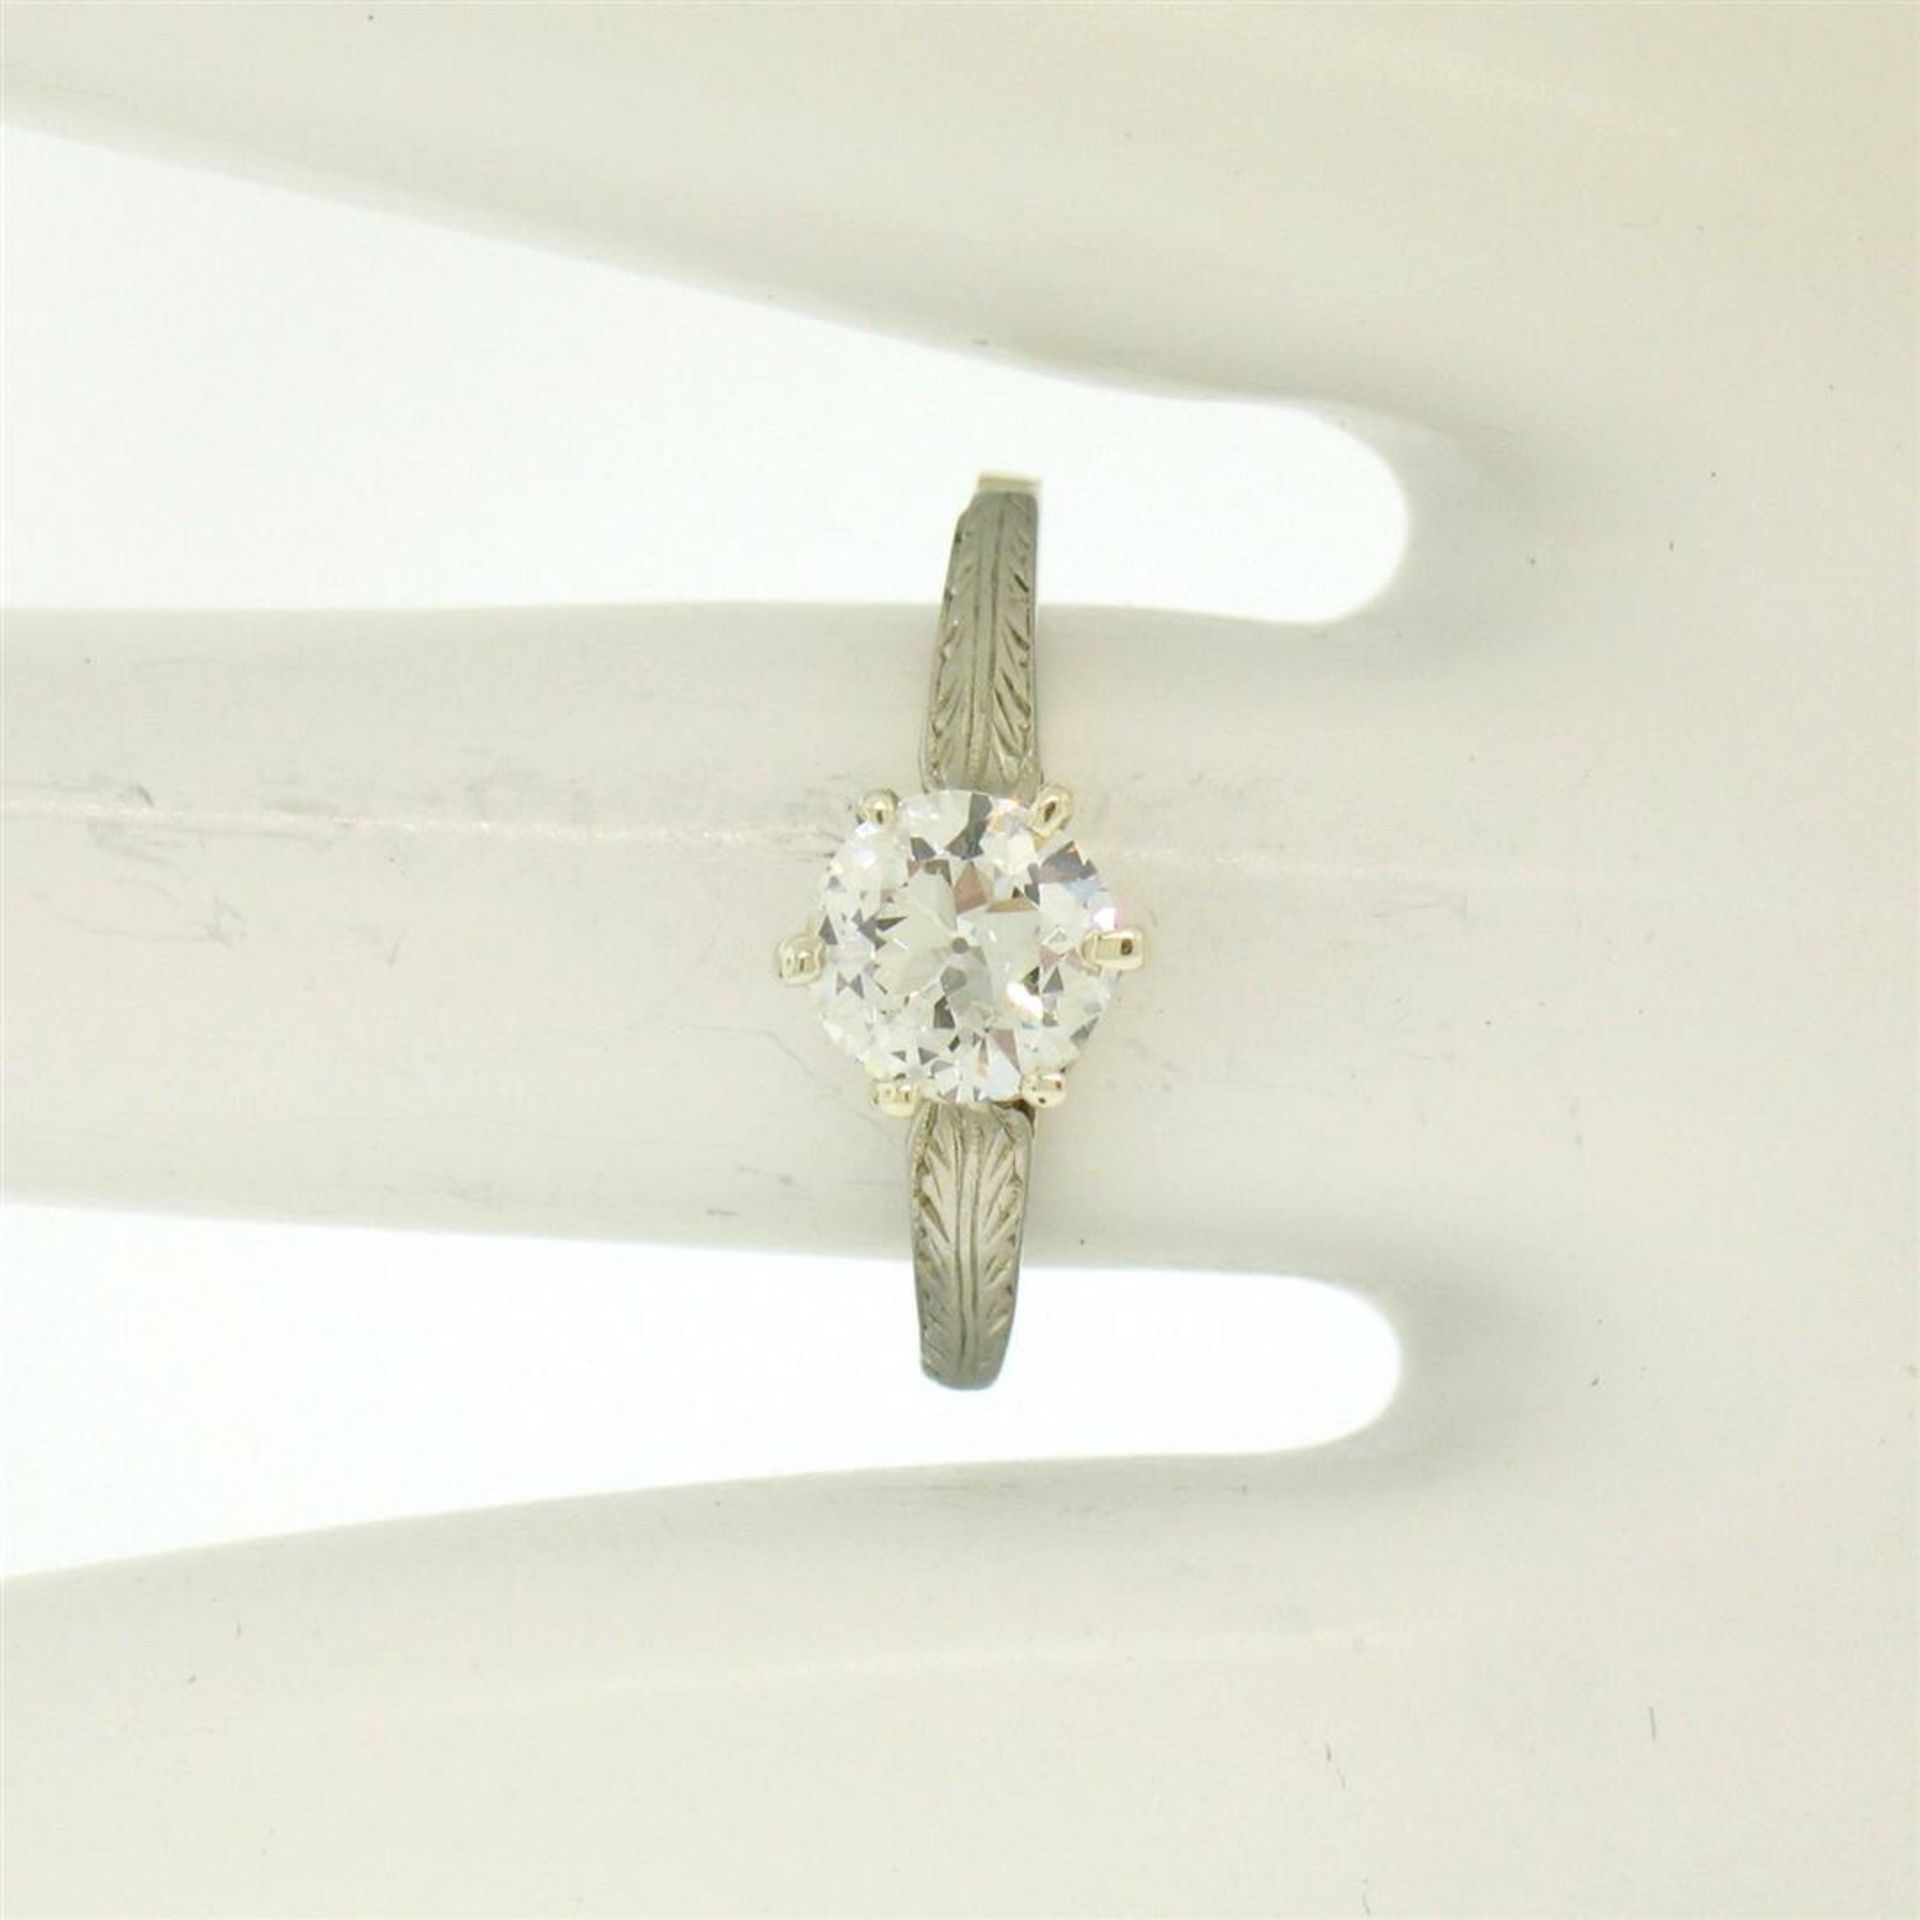 Etched 14k TT Gold .80 ct European Cut Diamond Solitaire Engagement Ring - Image 4 of 7